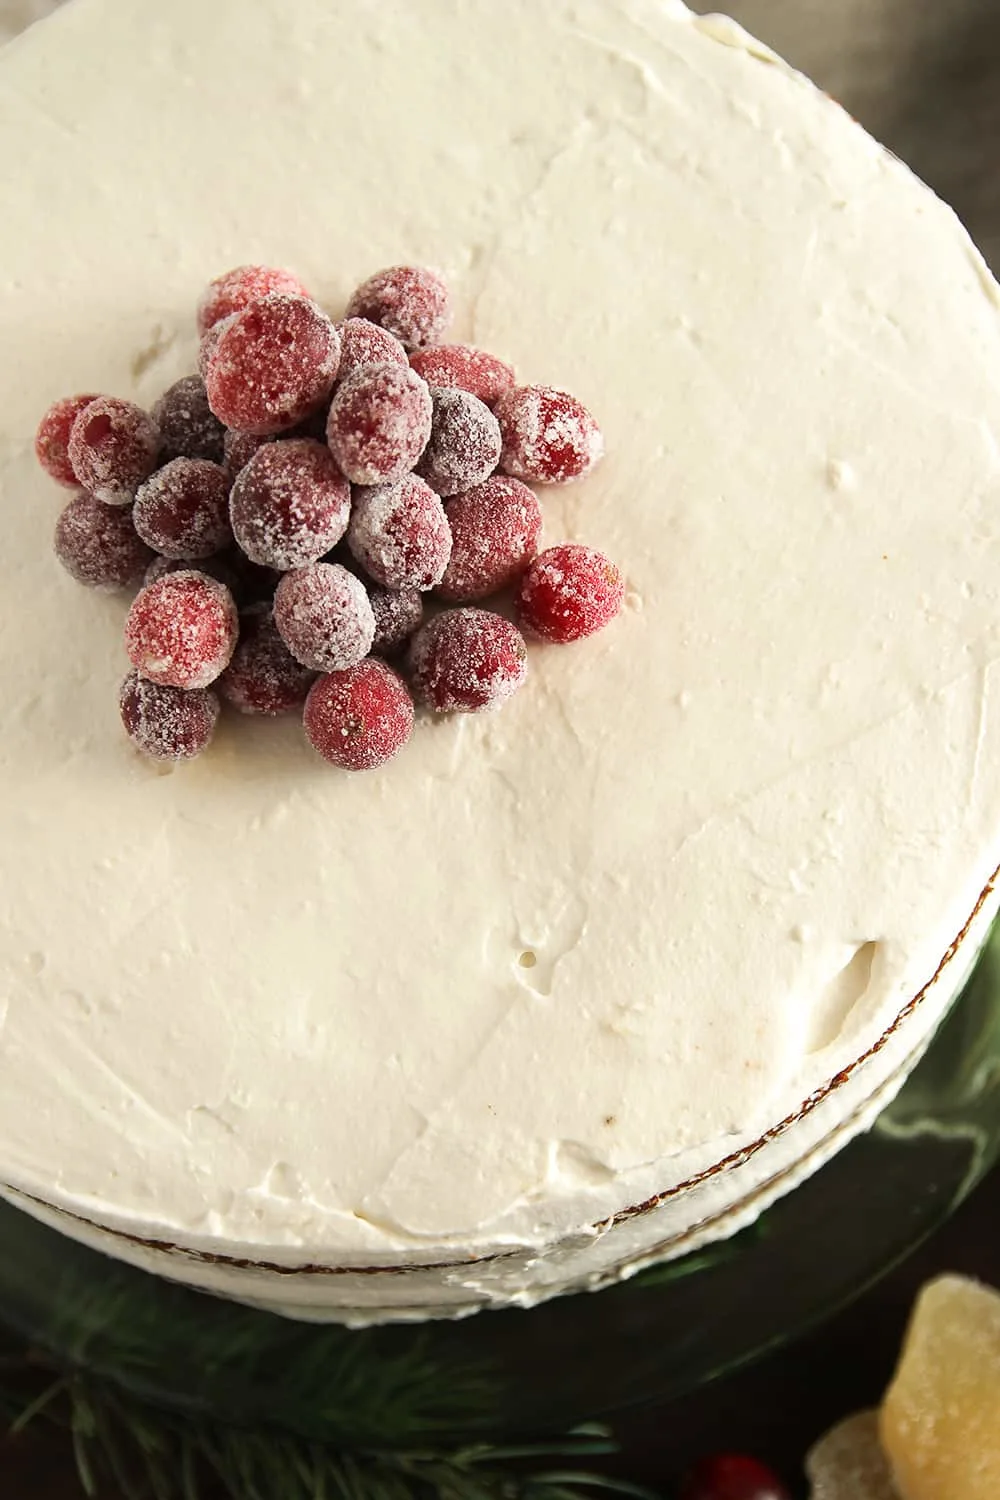 Sugared Cranberries add a festive touch to any holiday baked good, especially Gingerbread Layer Cake